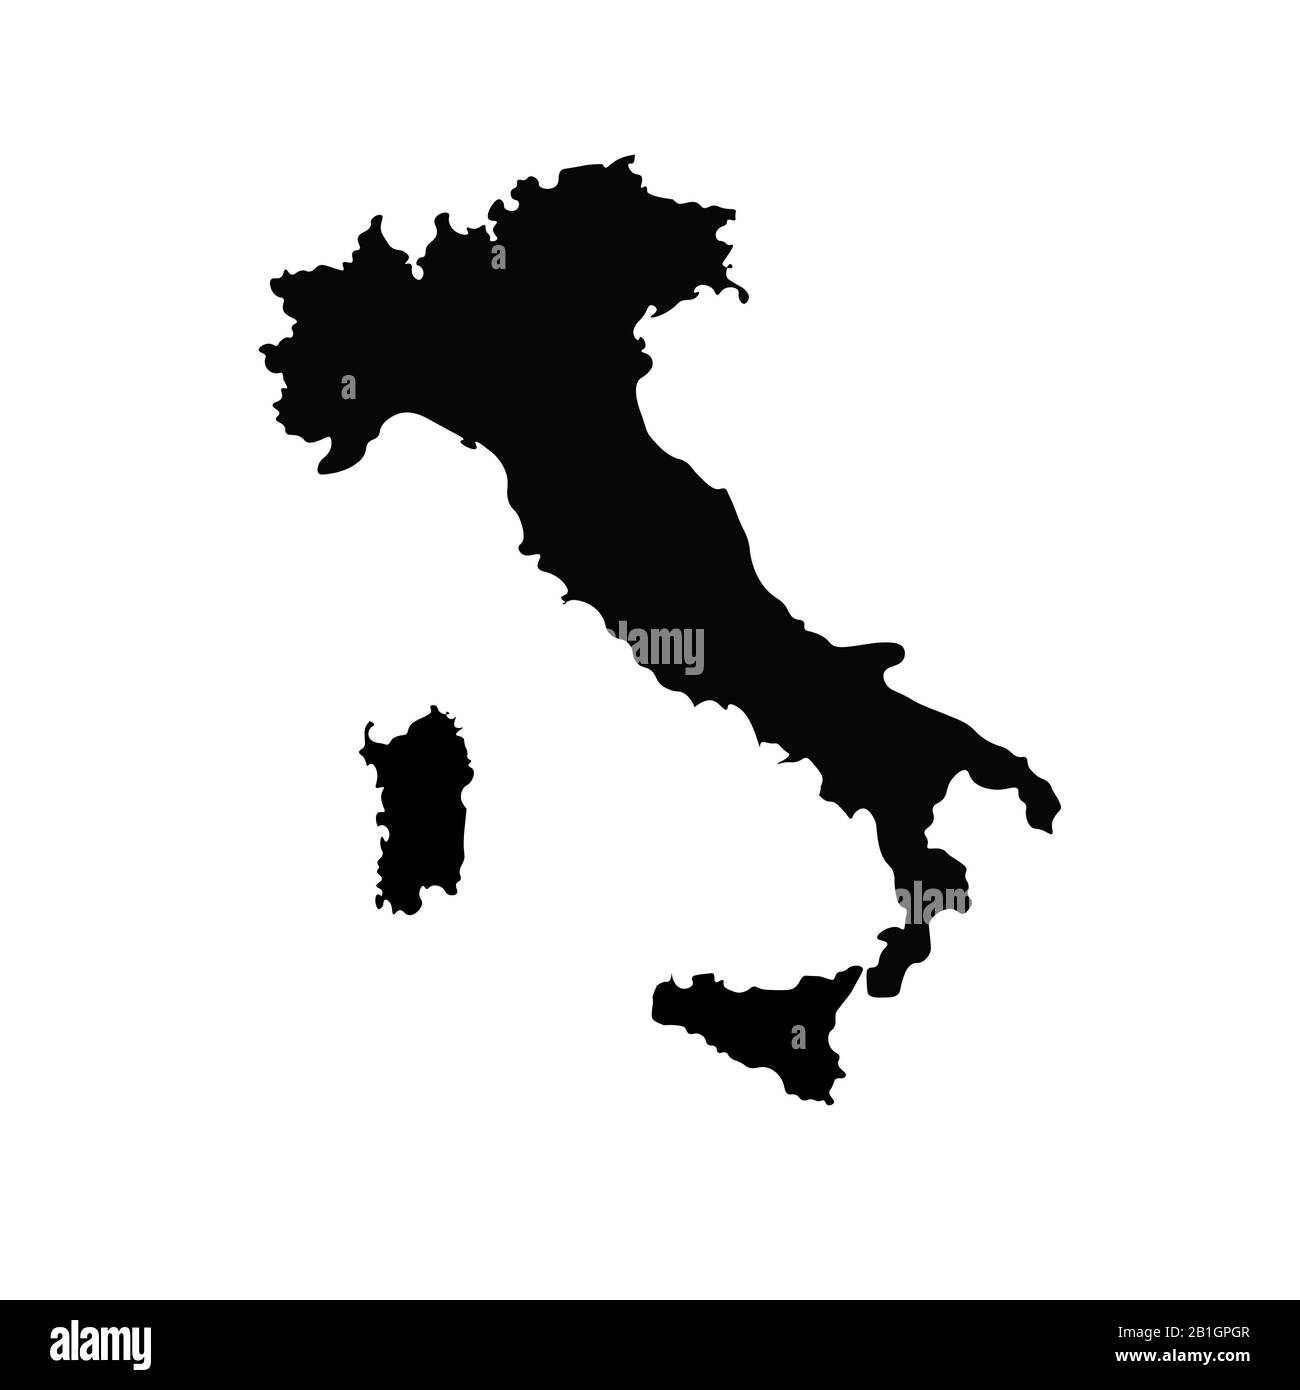 Silhouette of Italy on a white background. Raster illustration. Stock Photo